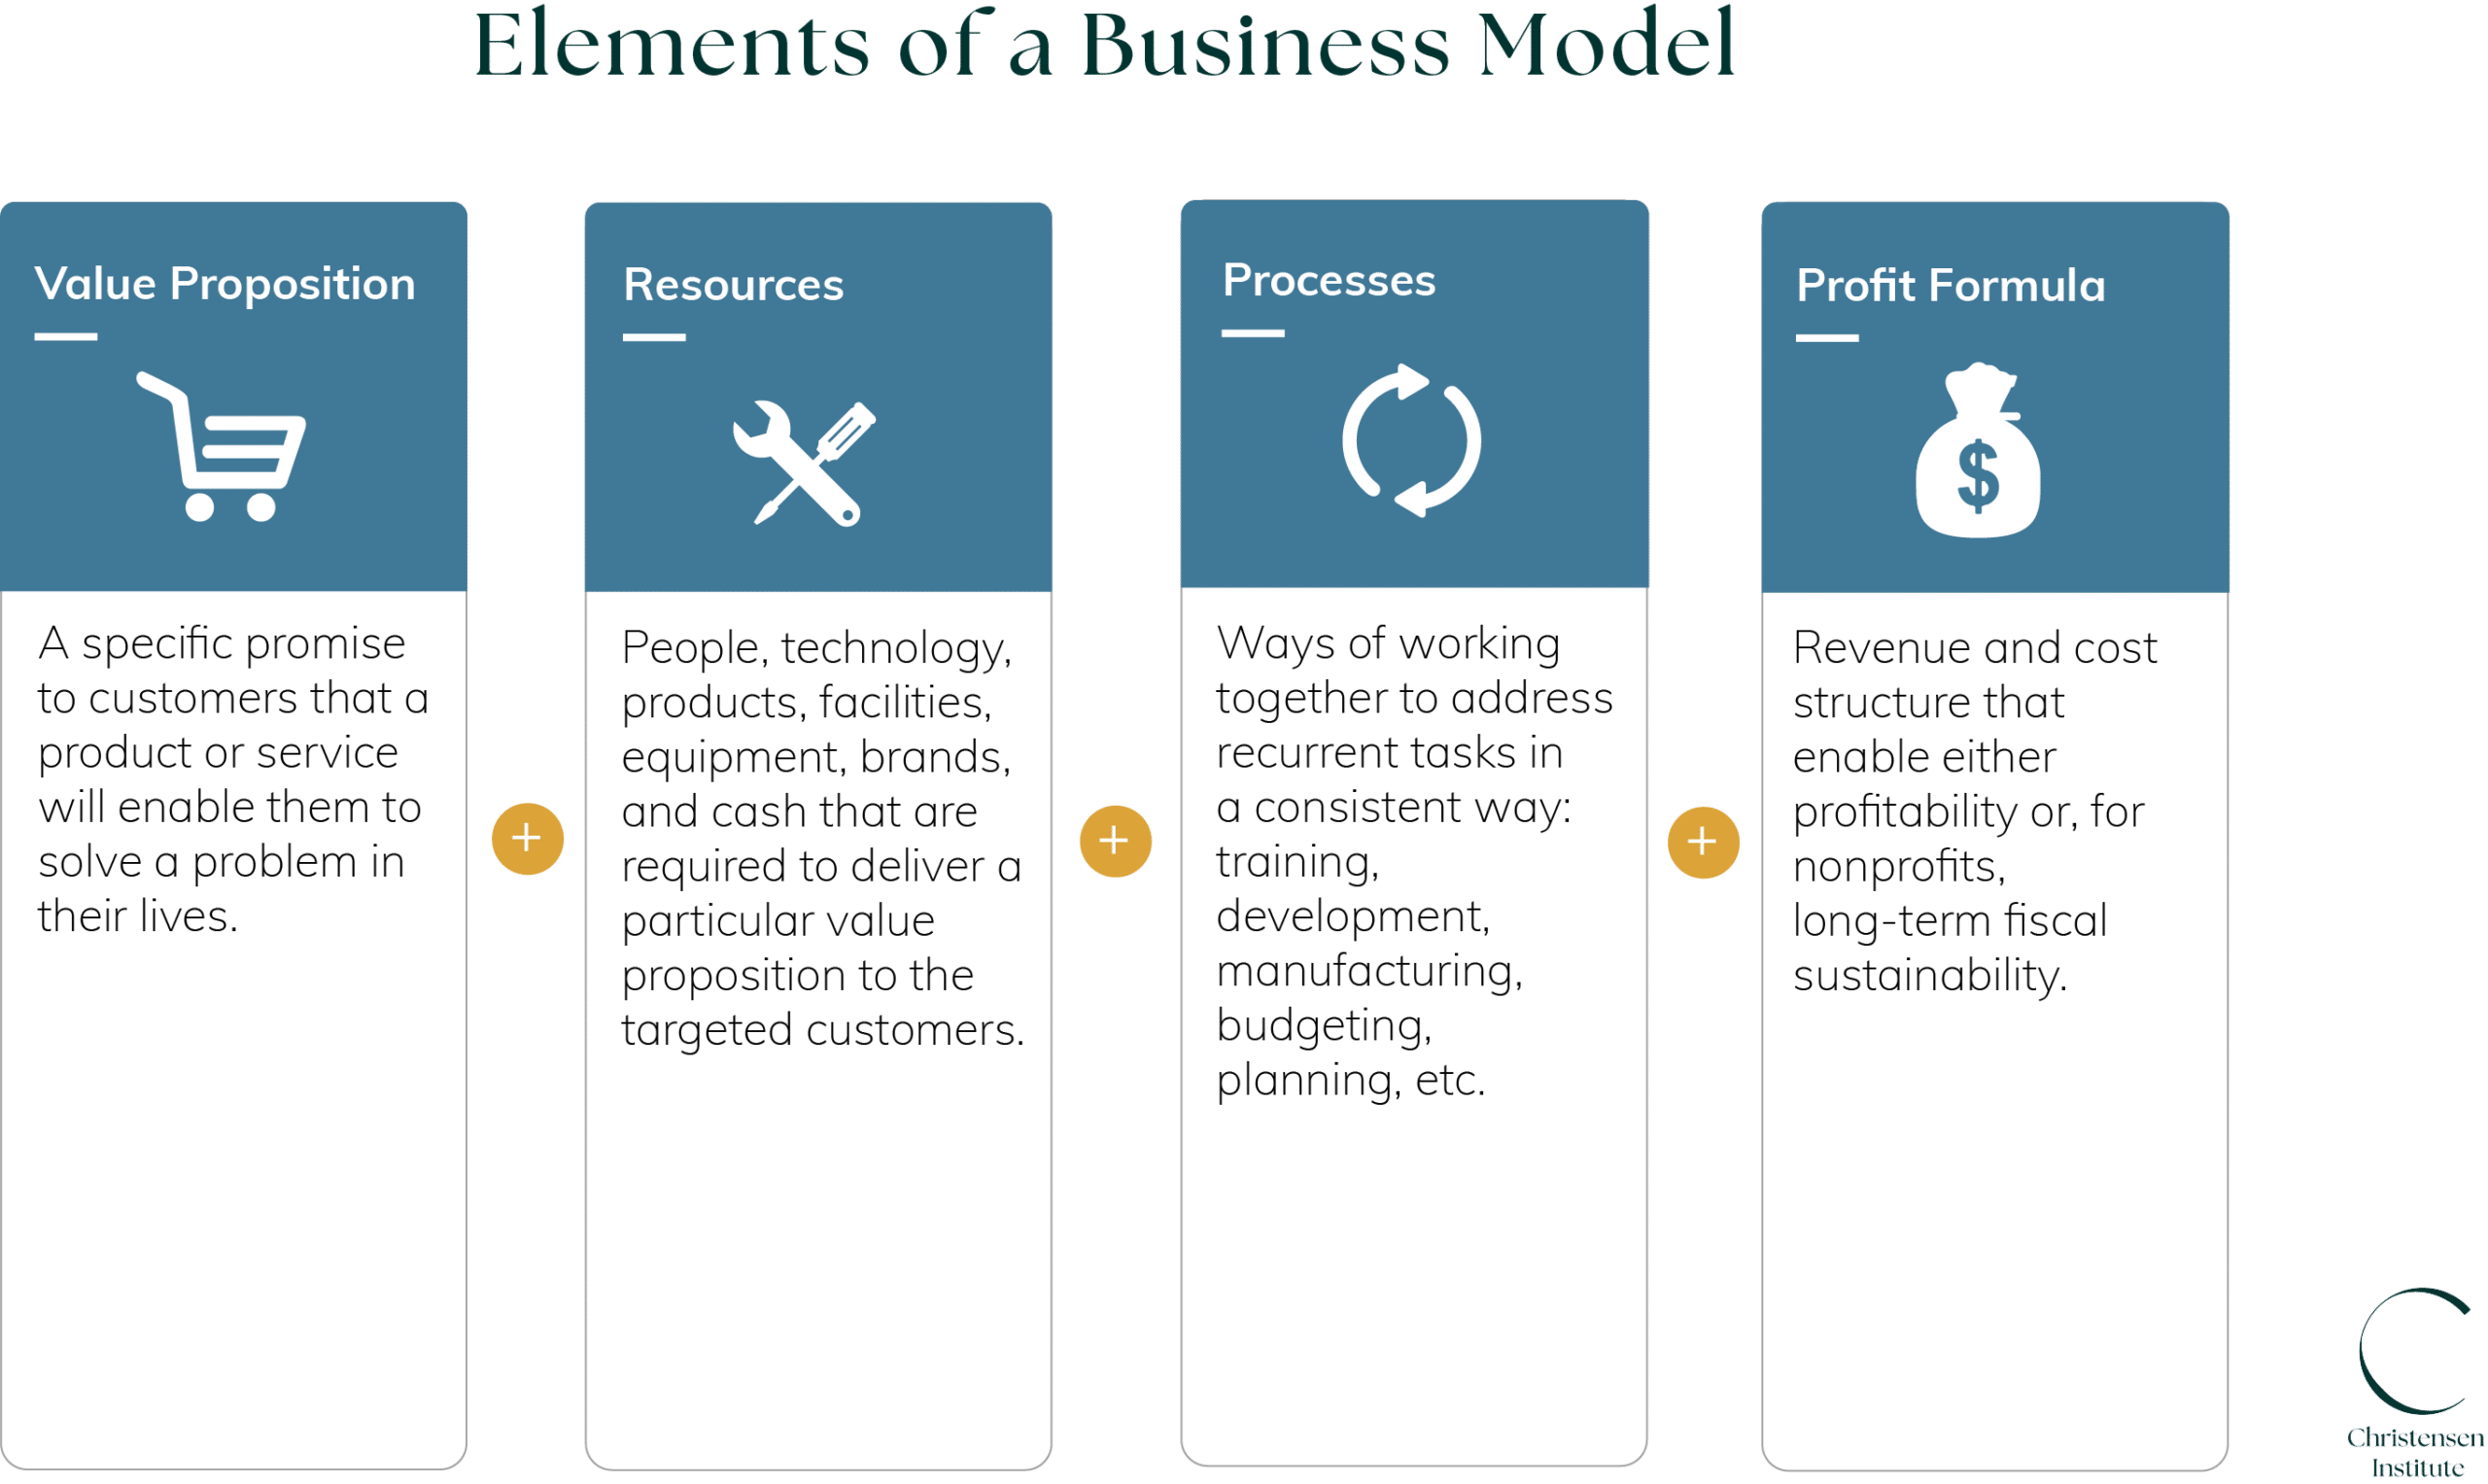 Graphic titled Elements of a business model